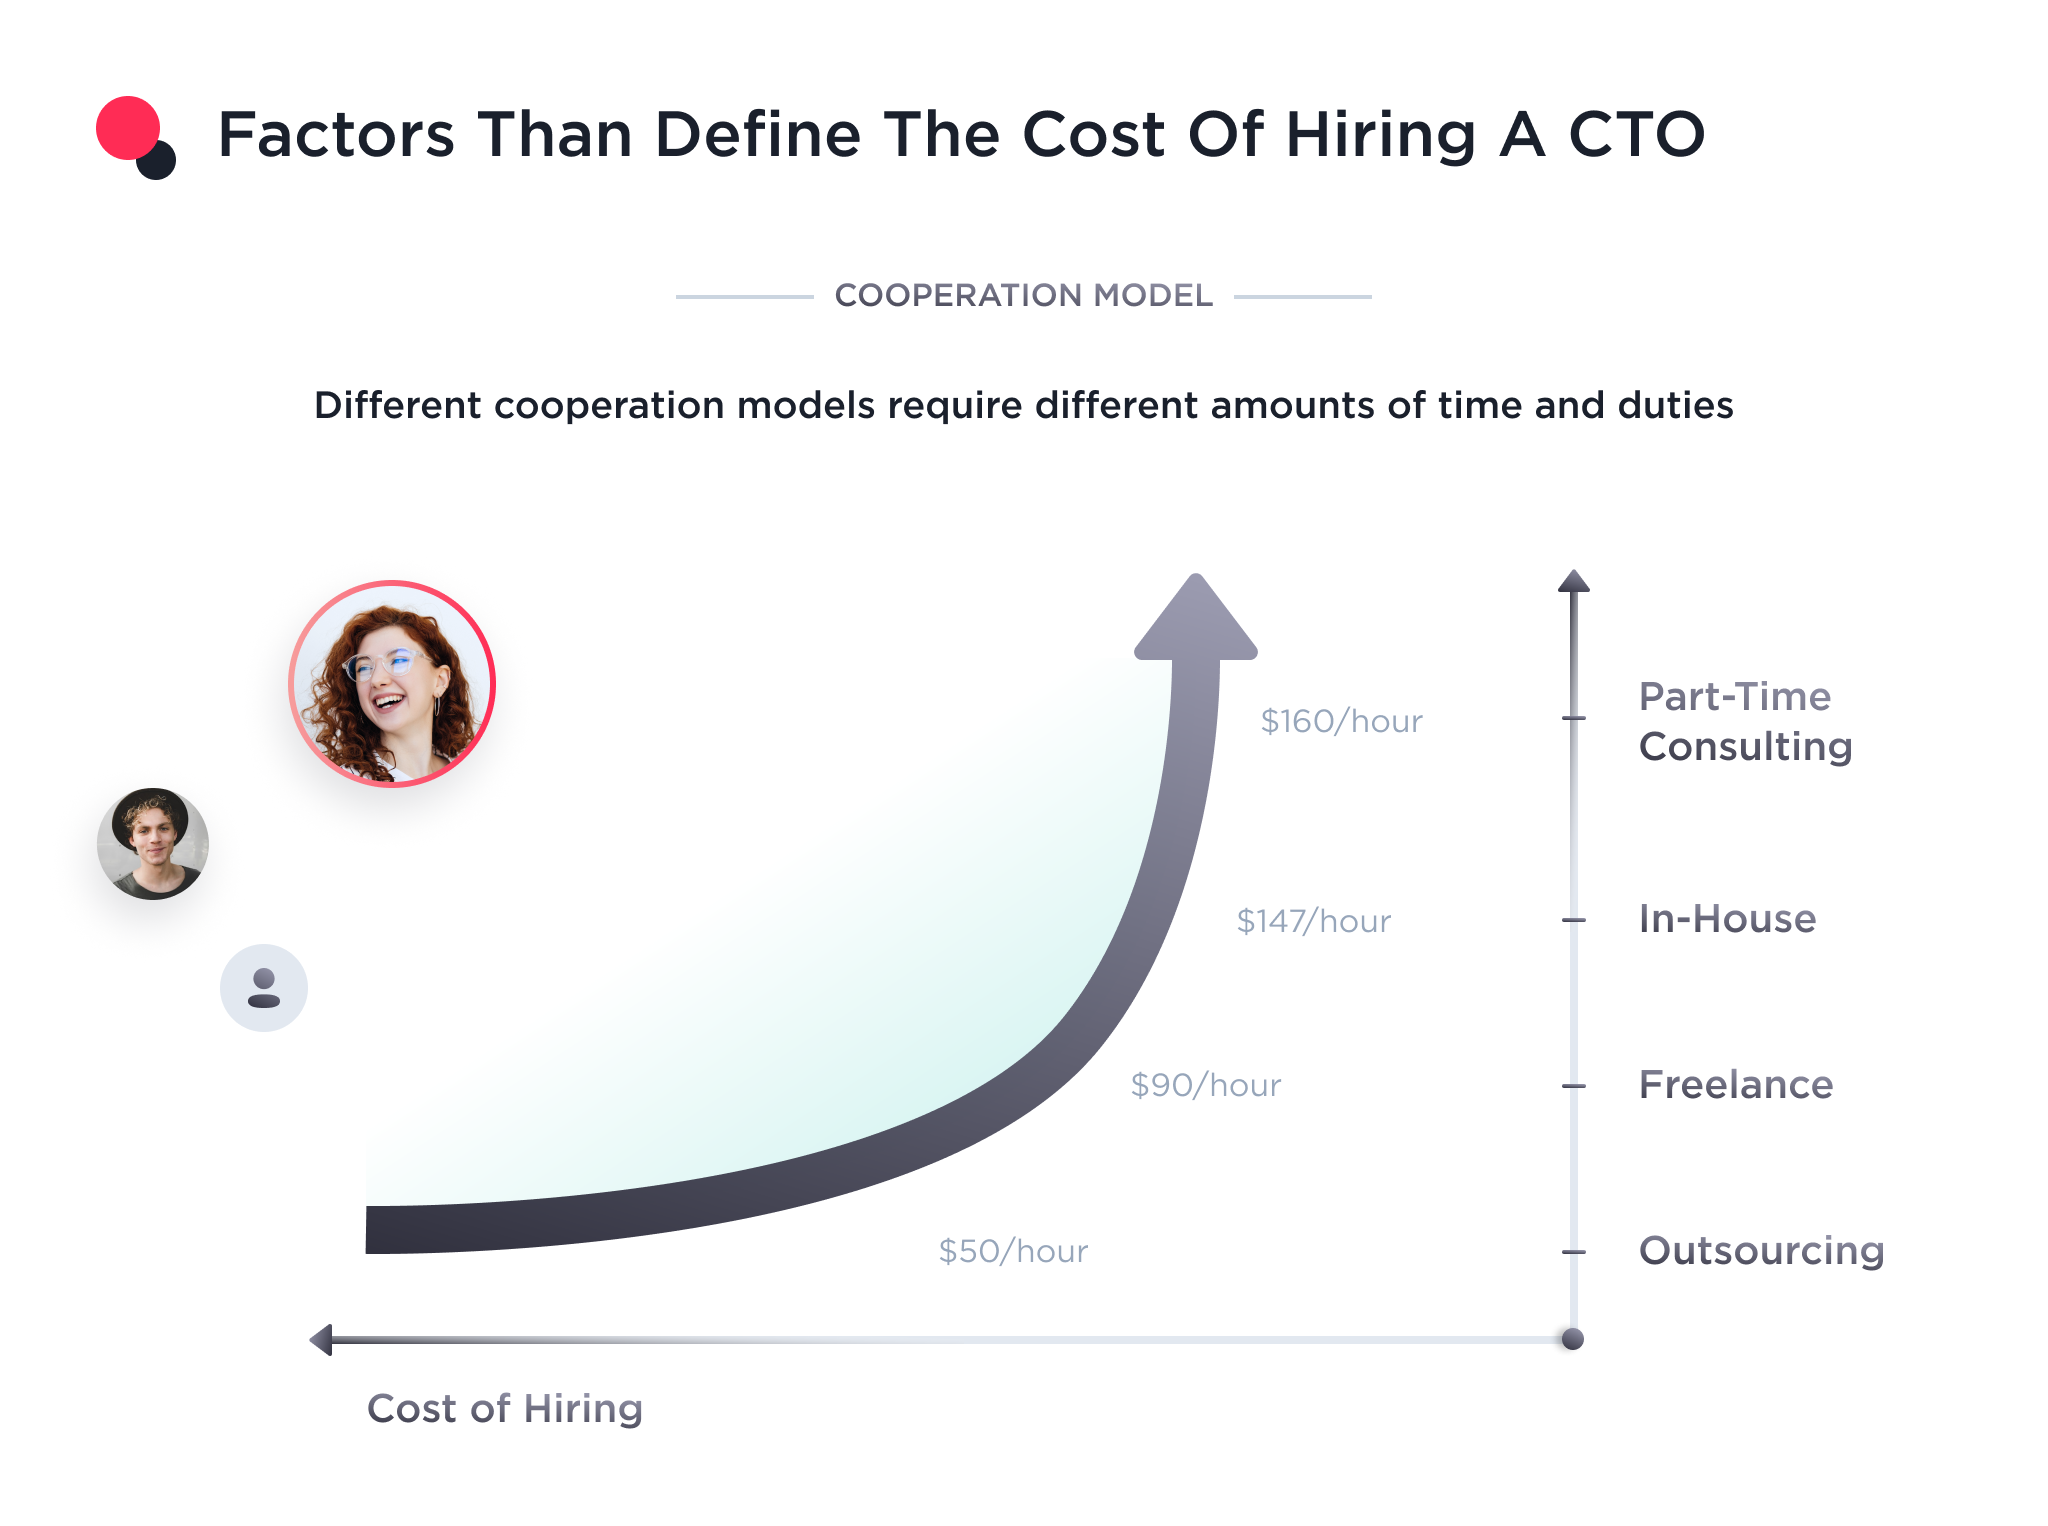 This illustration shows how cooperation model impacts the cost of hiring a CTO